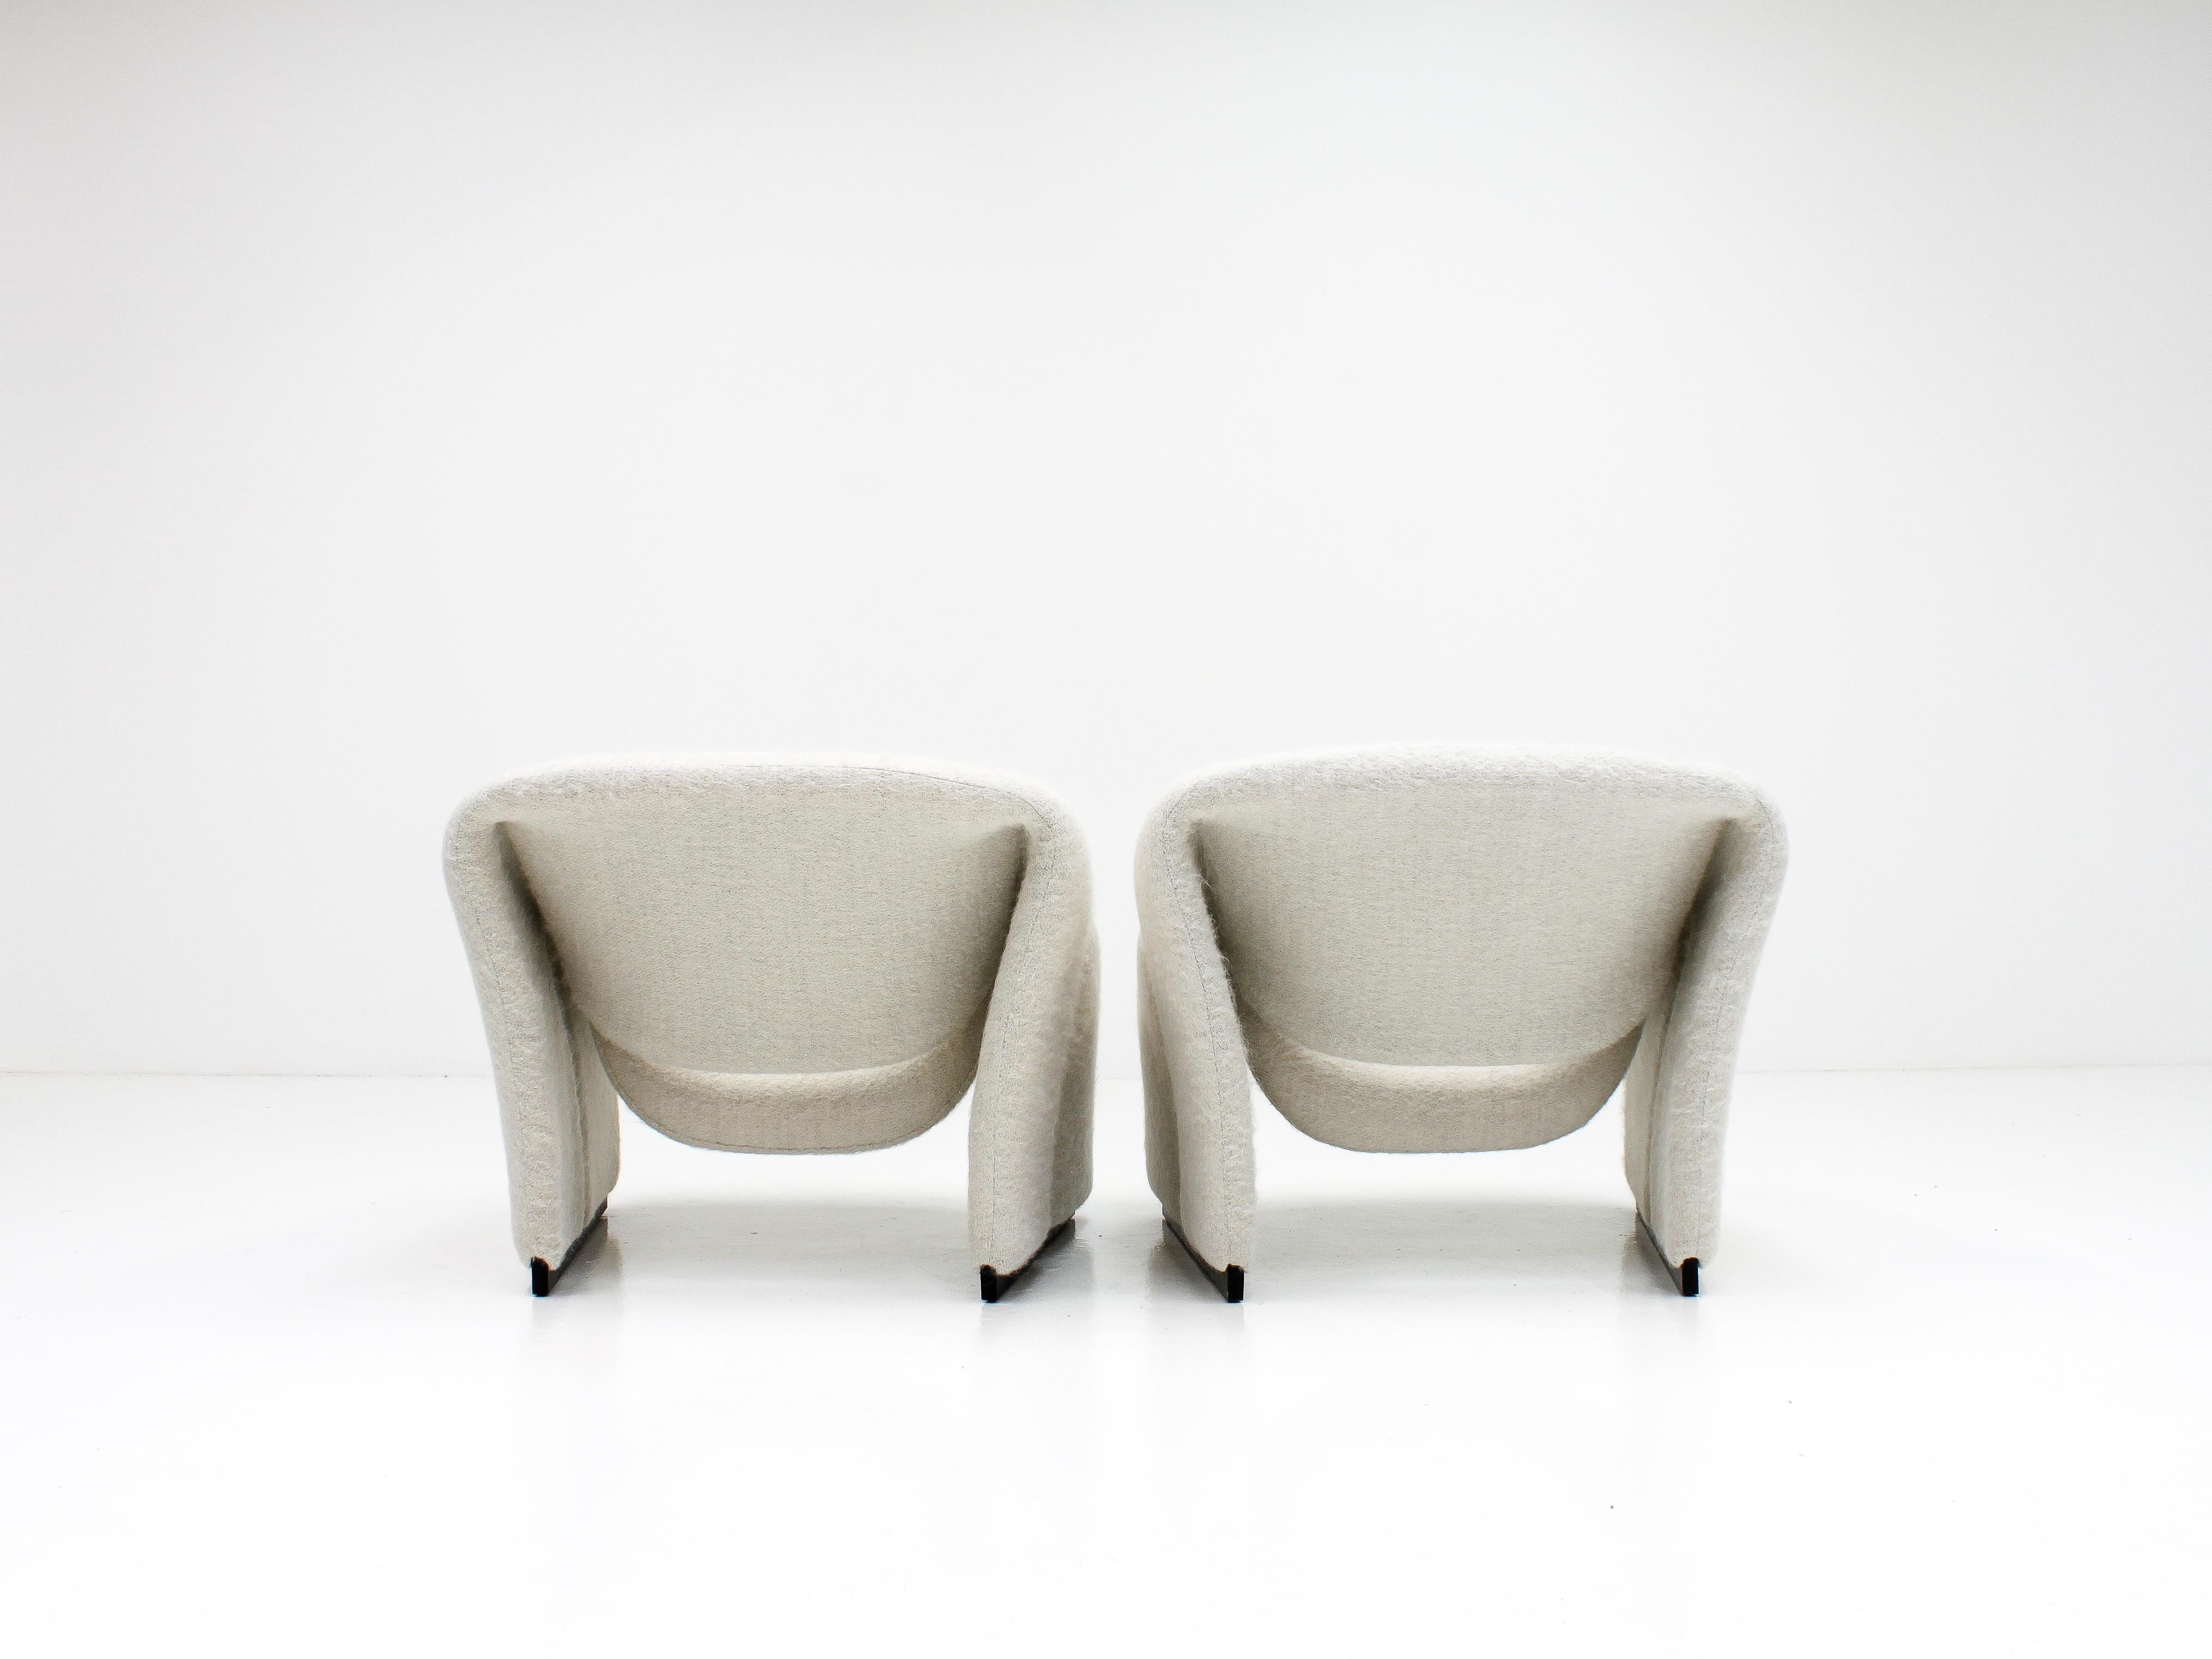 Pair of Pierre Paulin F580 1st Edition Groovy Chairs in Pierre Frey for Artifort 4